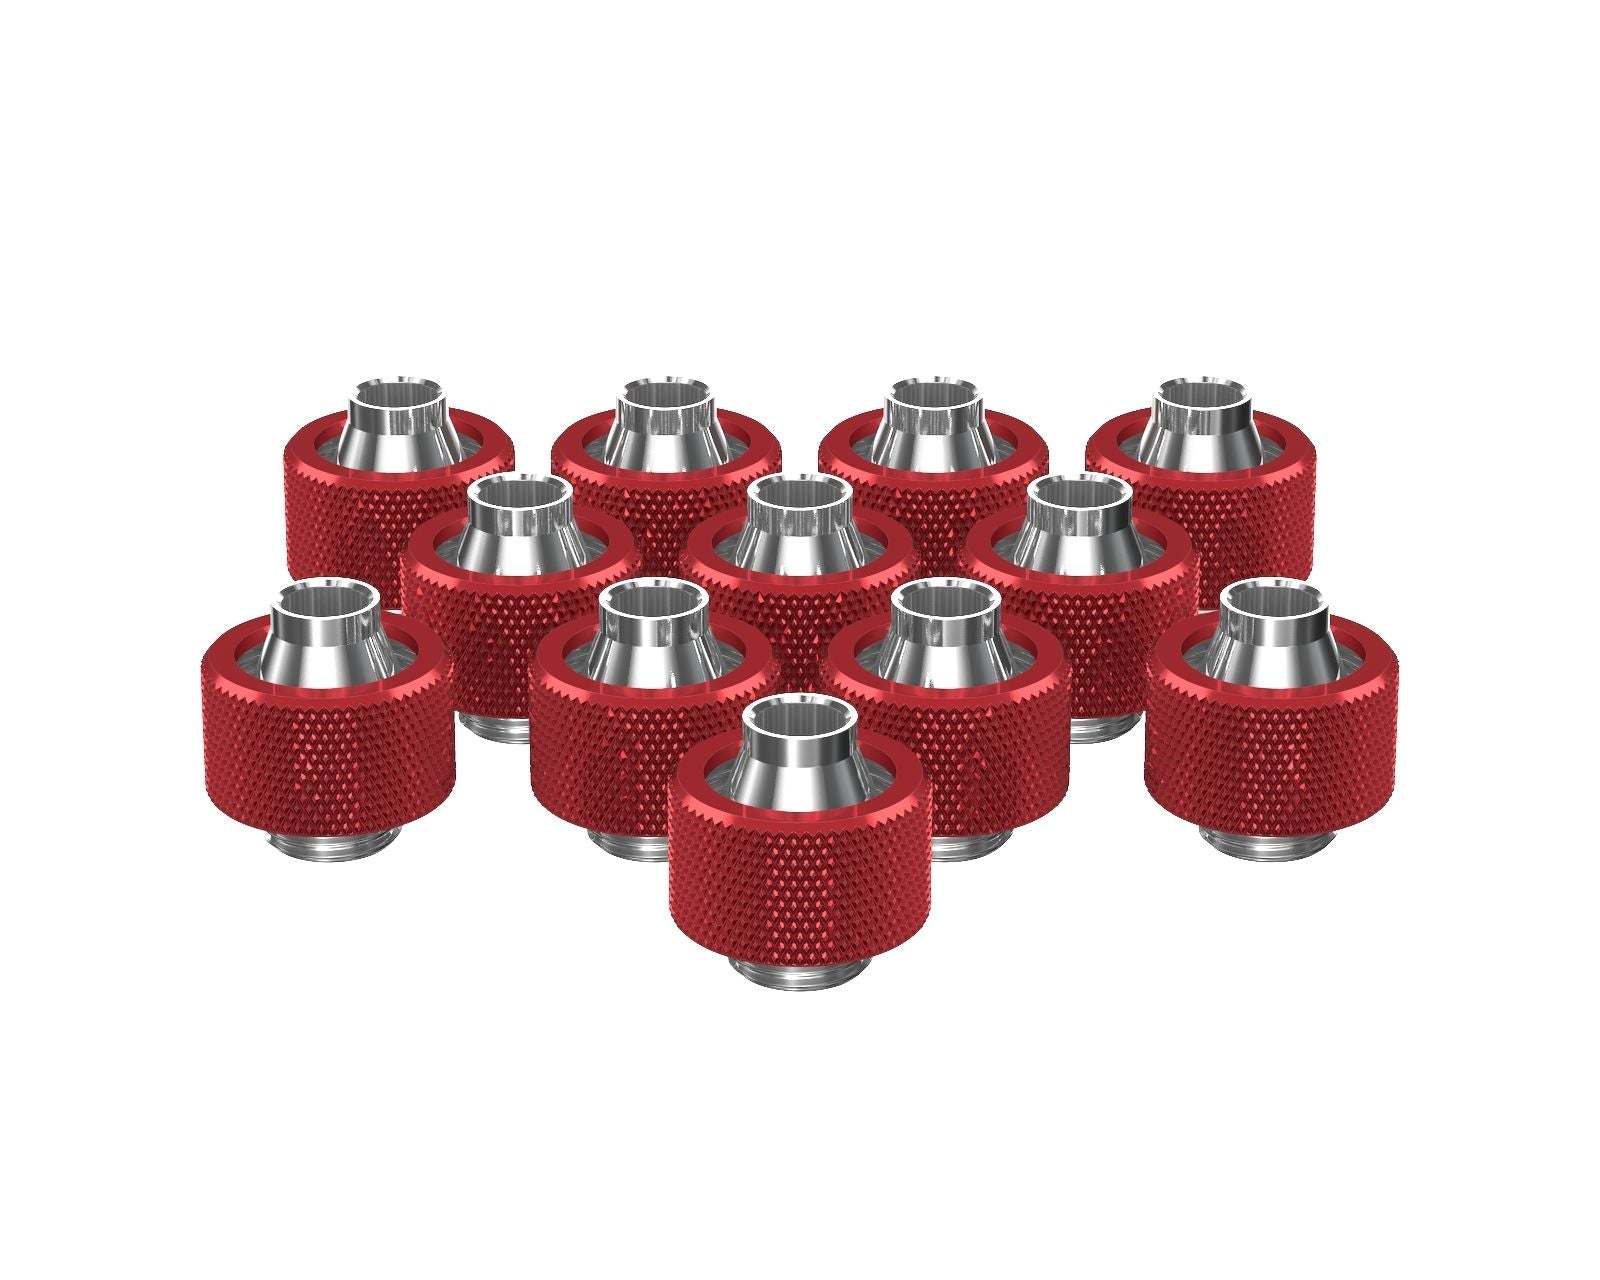 PrimoChill SecureFit SX - Premium Compression Fitting For 3/8in ID x 5/8in OD Flexible Tubing 12 Pack (F-SFSX58-12) - Available in 20+ Colors, Custom Watercooling Loop Ready - Candy Red